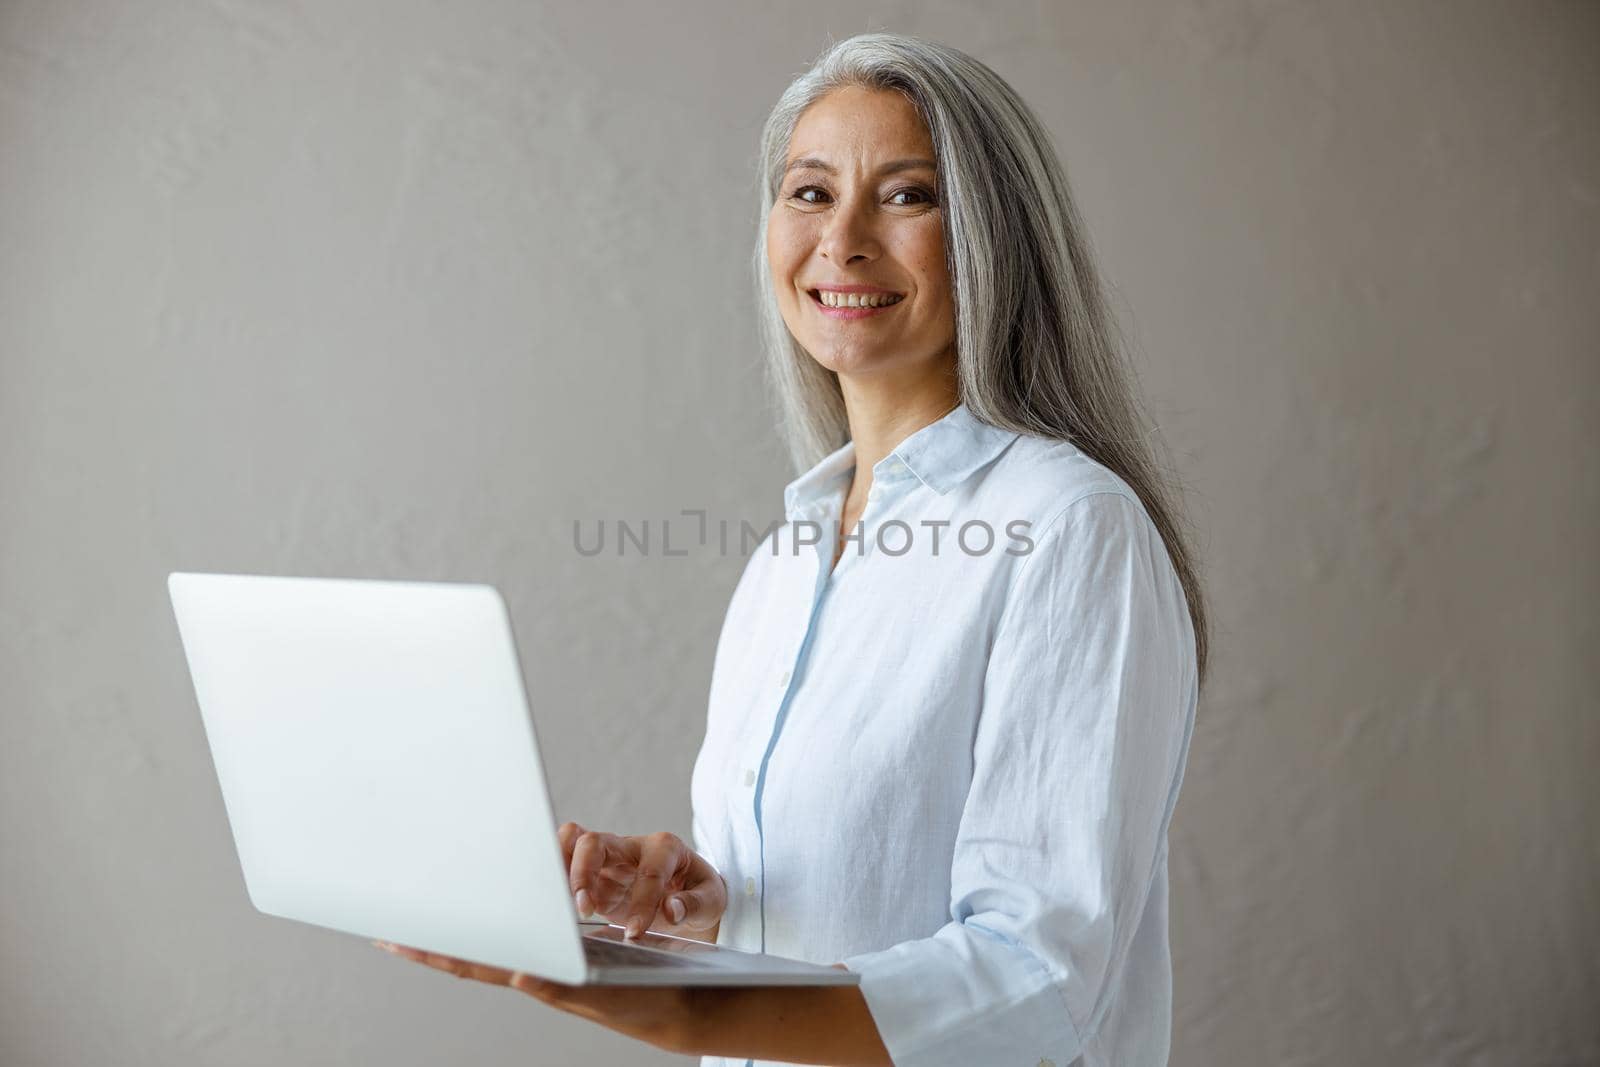 Cheerful silver haired mature Asian businesswoman in white blouse works on modern laptop posing near grey stone wall in studio